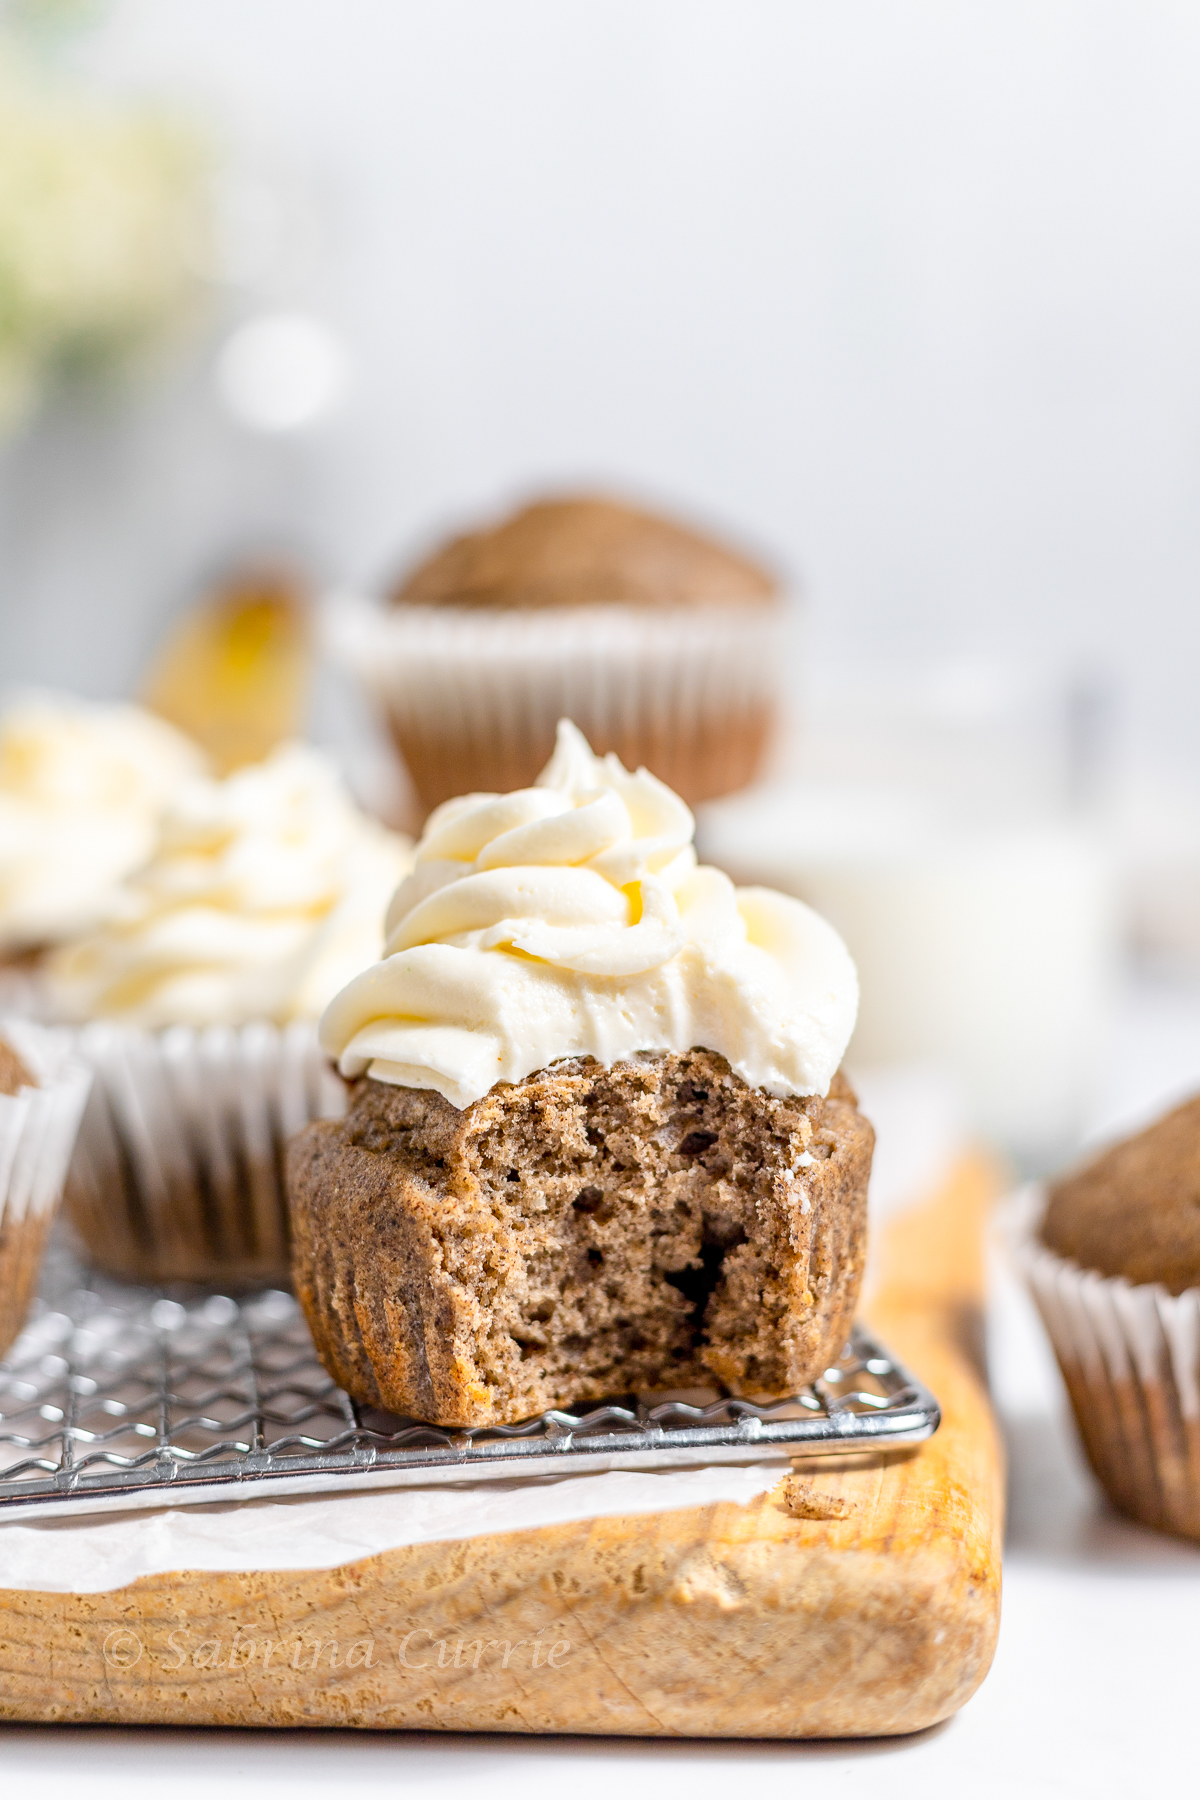 Closeup of a tender brown muffin with creamy white frosting on top and a big bite out of the front.